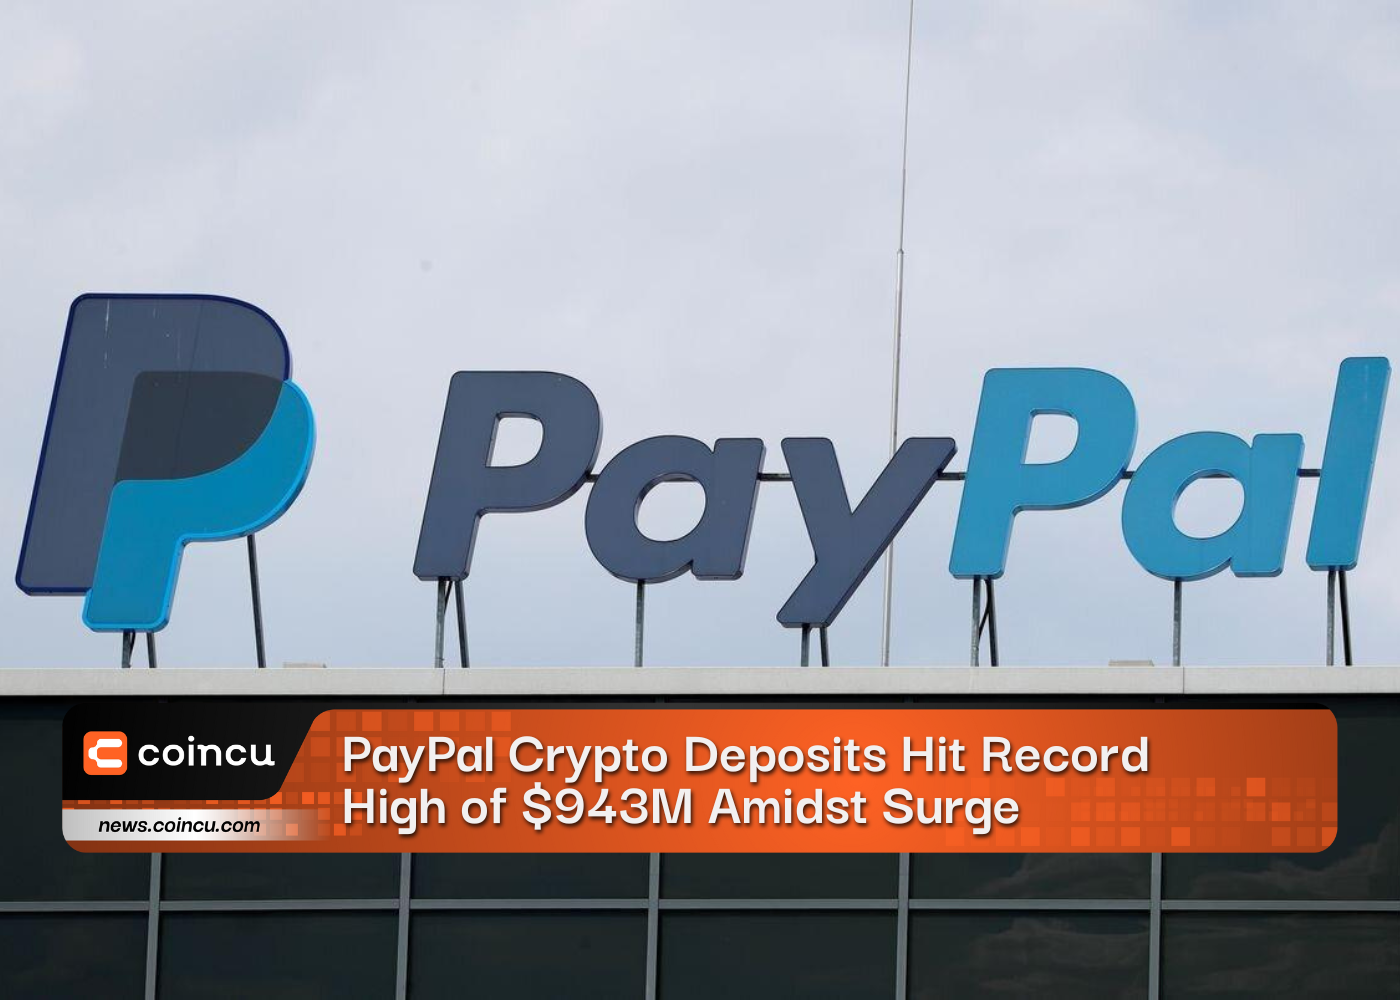 PayPal Crypto Deposits Hit Record